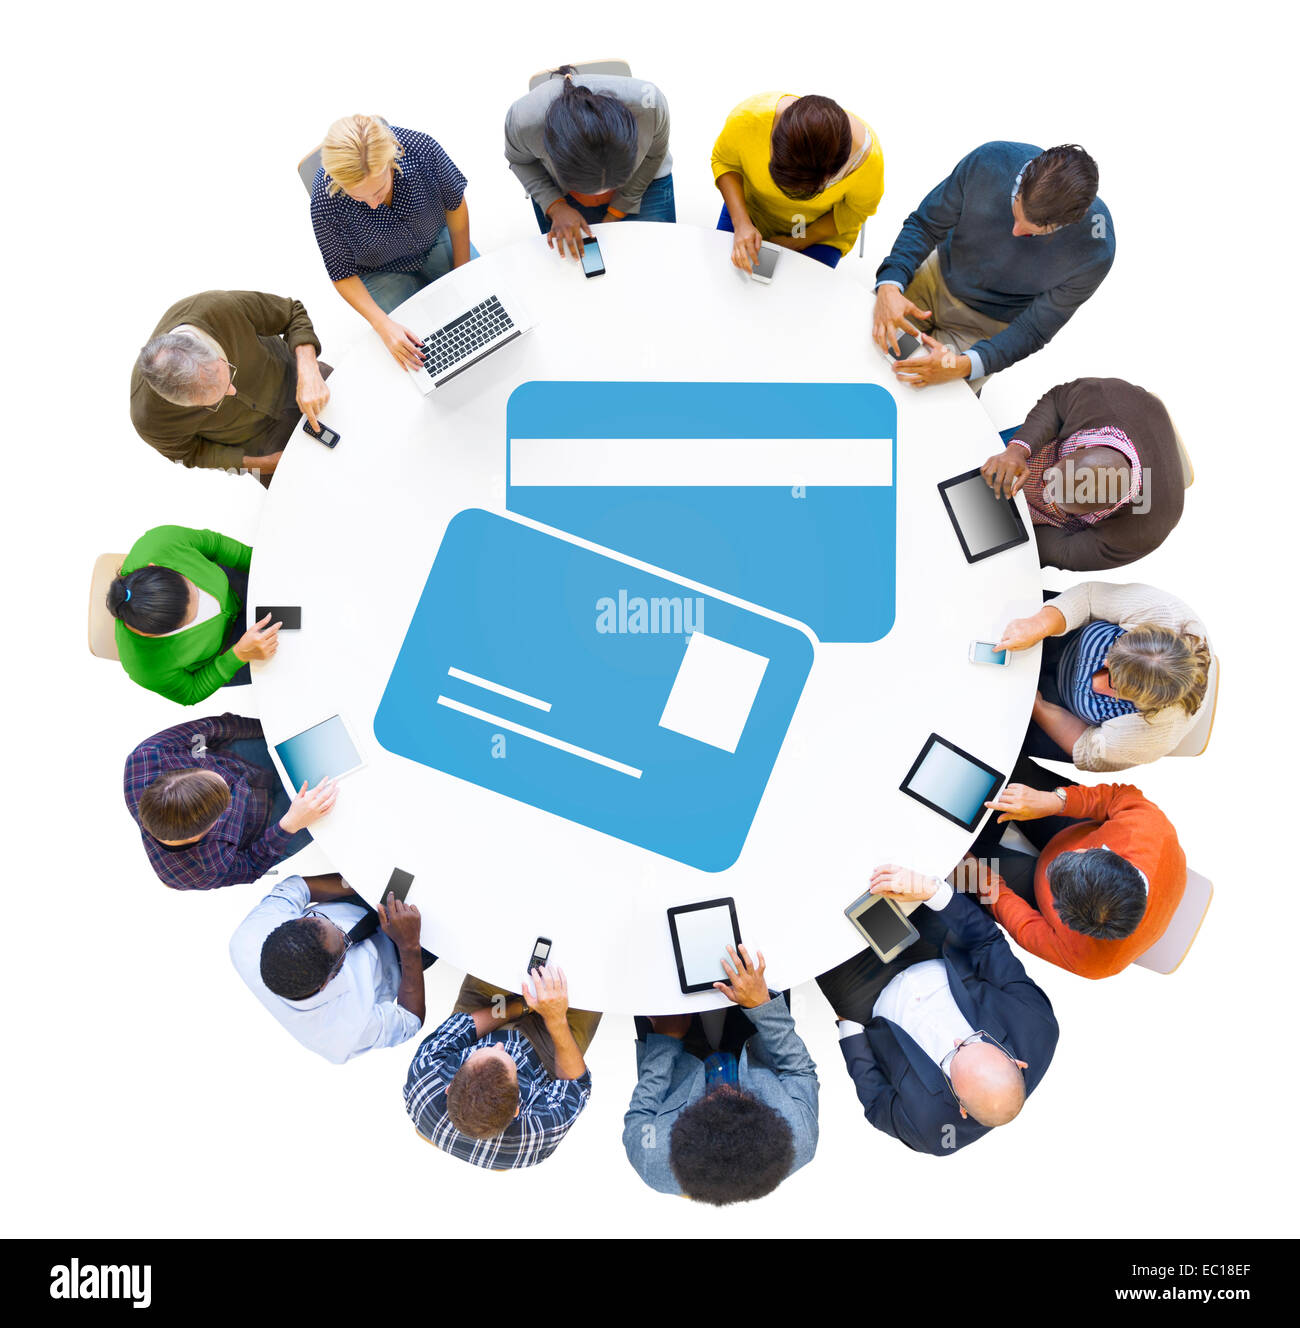 Group of People Using Digital Devices with Credit Card Symbol Stock Photo